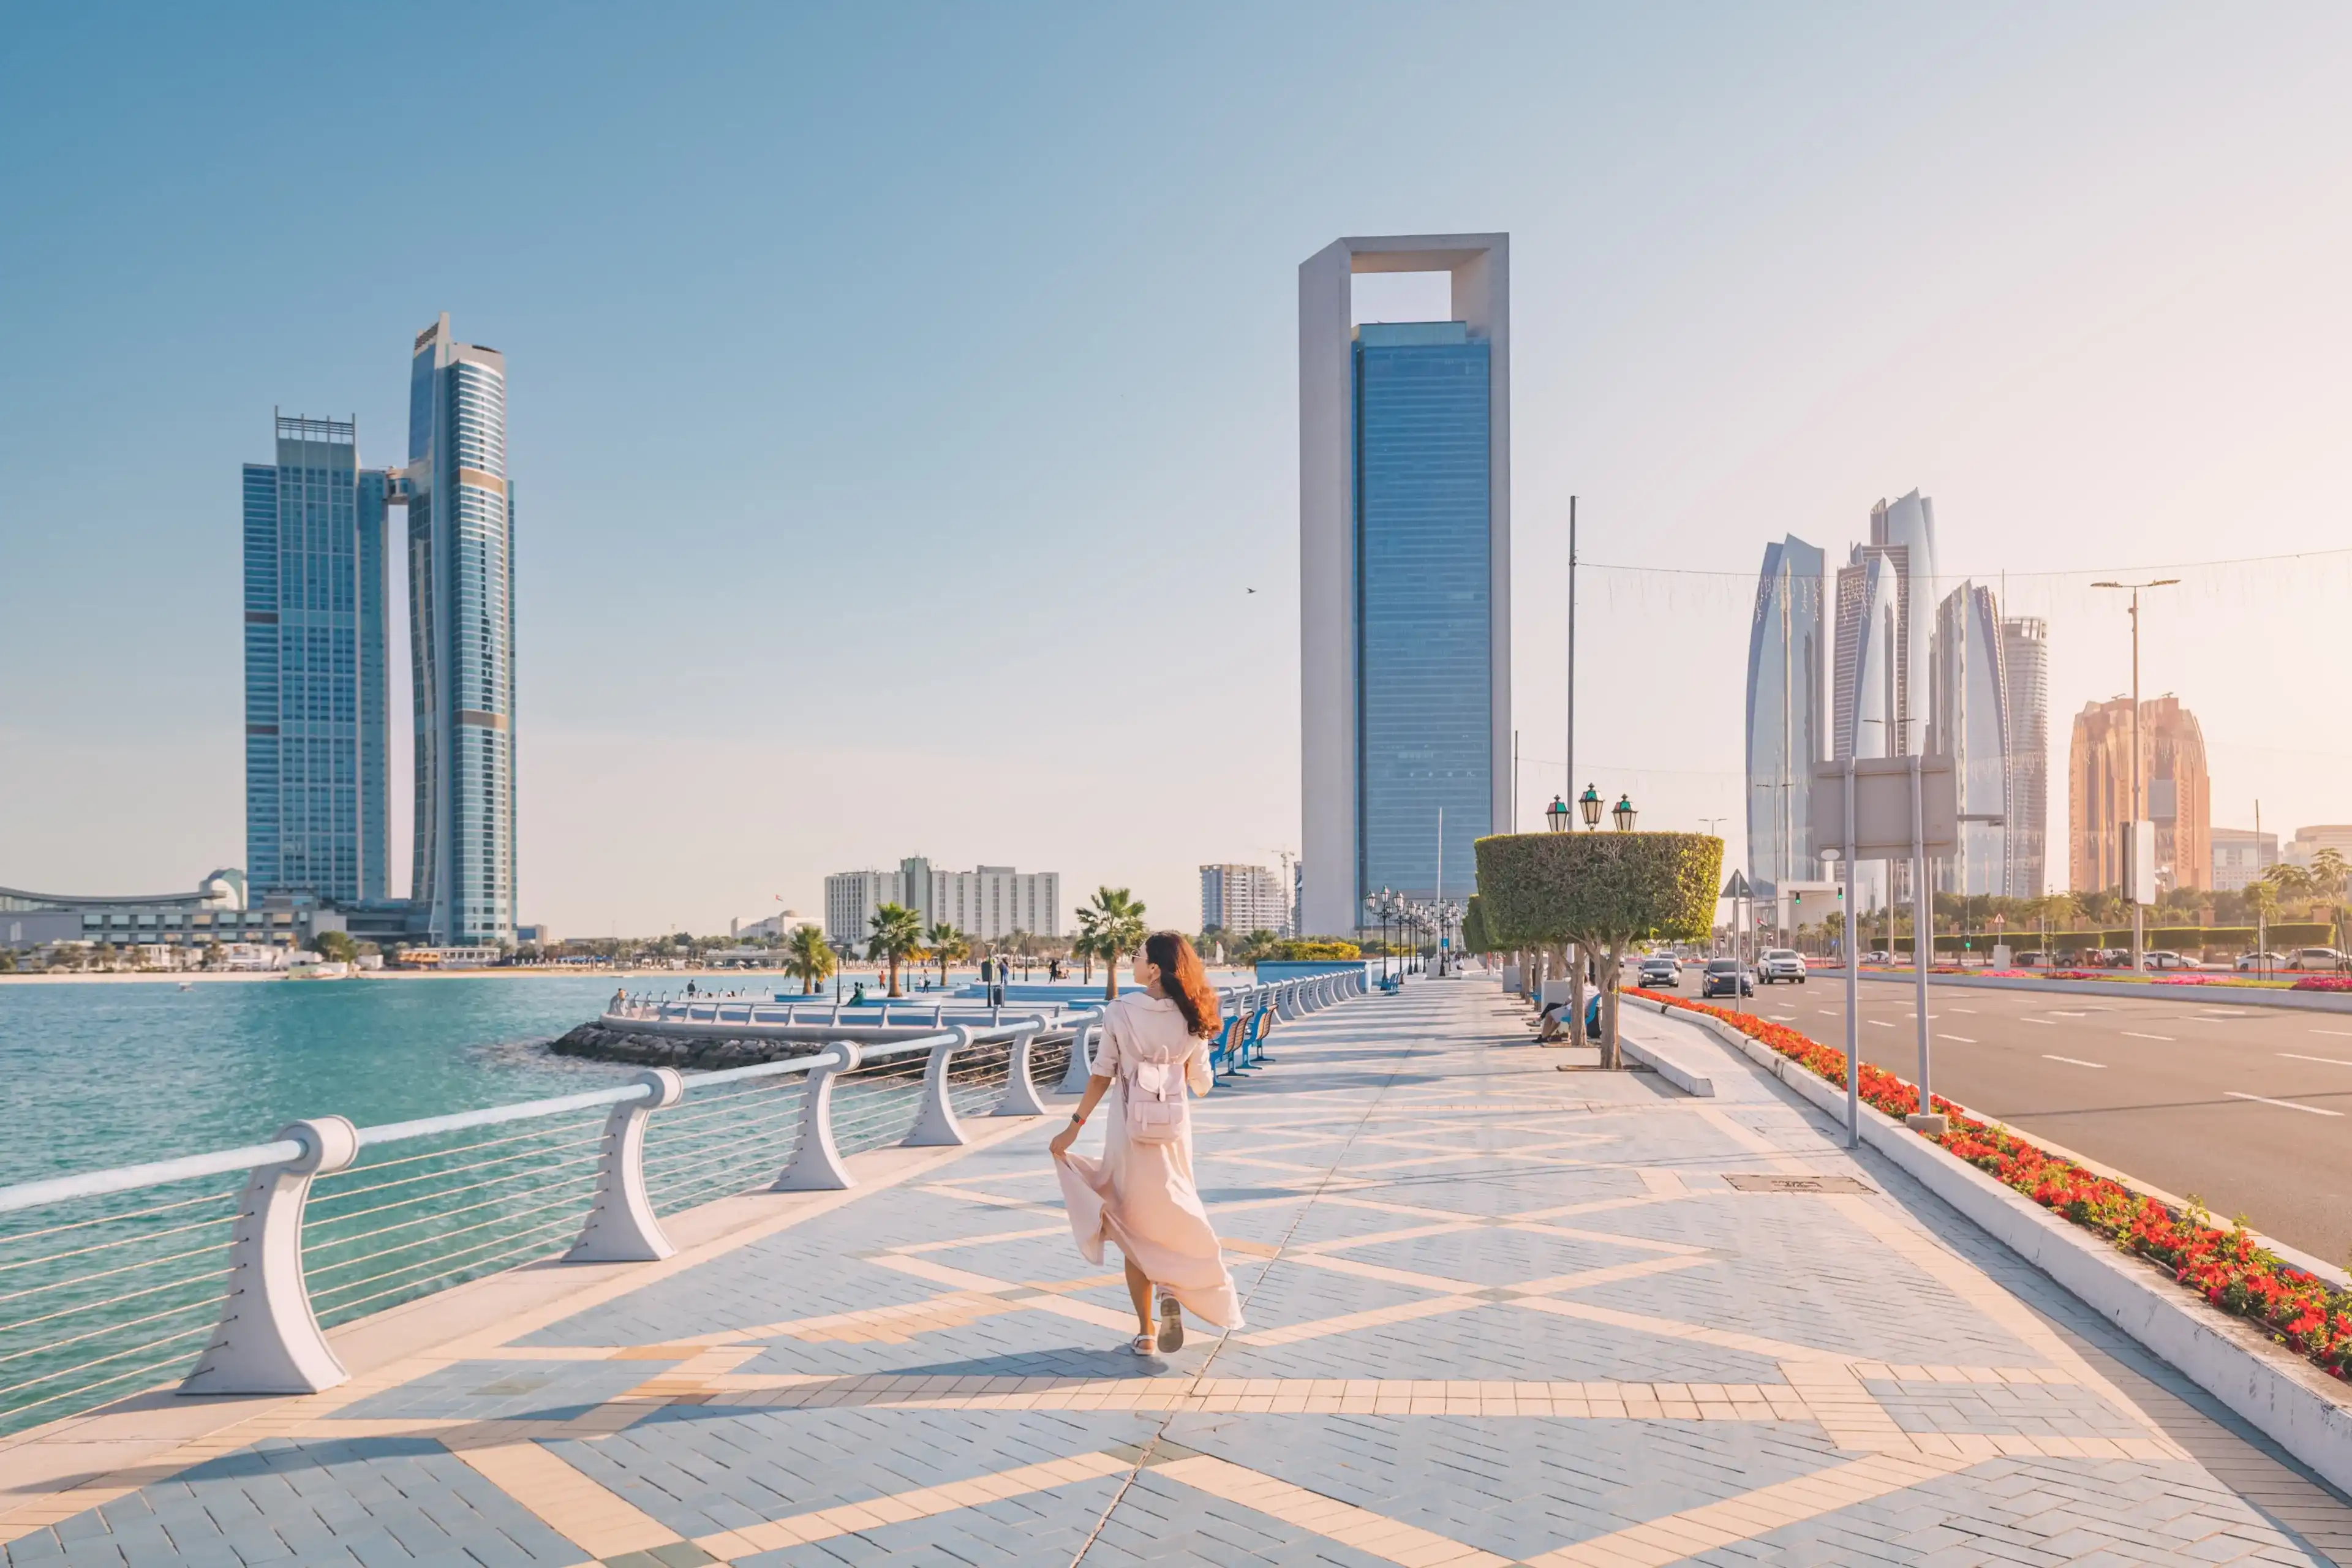 Strolling along the Abu Dhabi Corniche, a scenic waterfront promenade with stunning views of the Arabian Gulf and the city's iconic skyscrapers, is a must-do for any visitor to the UAE's capital.